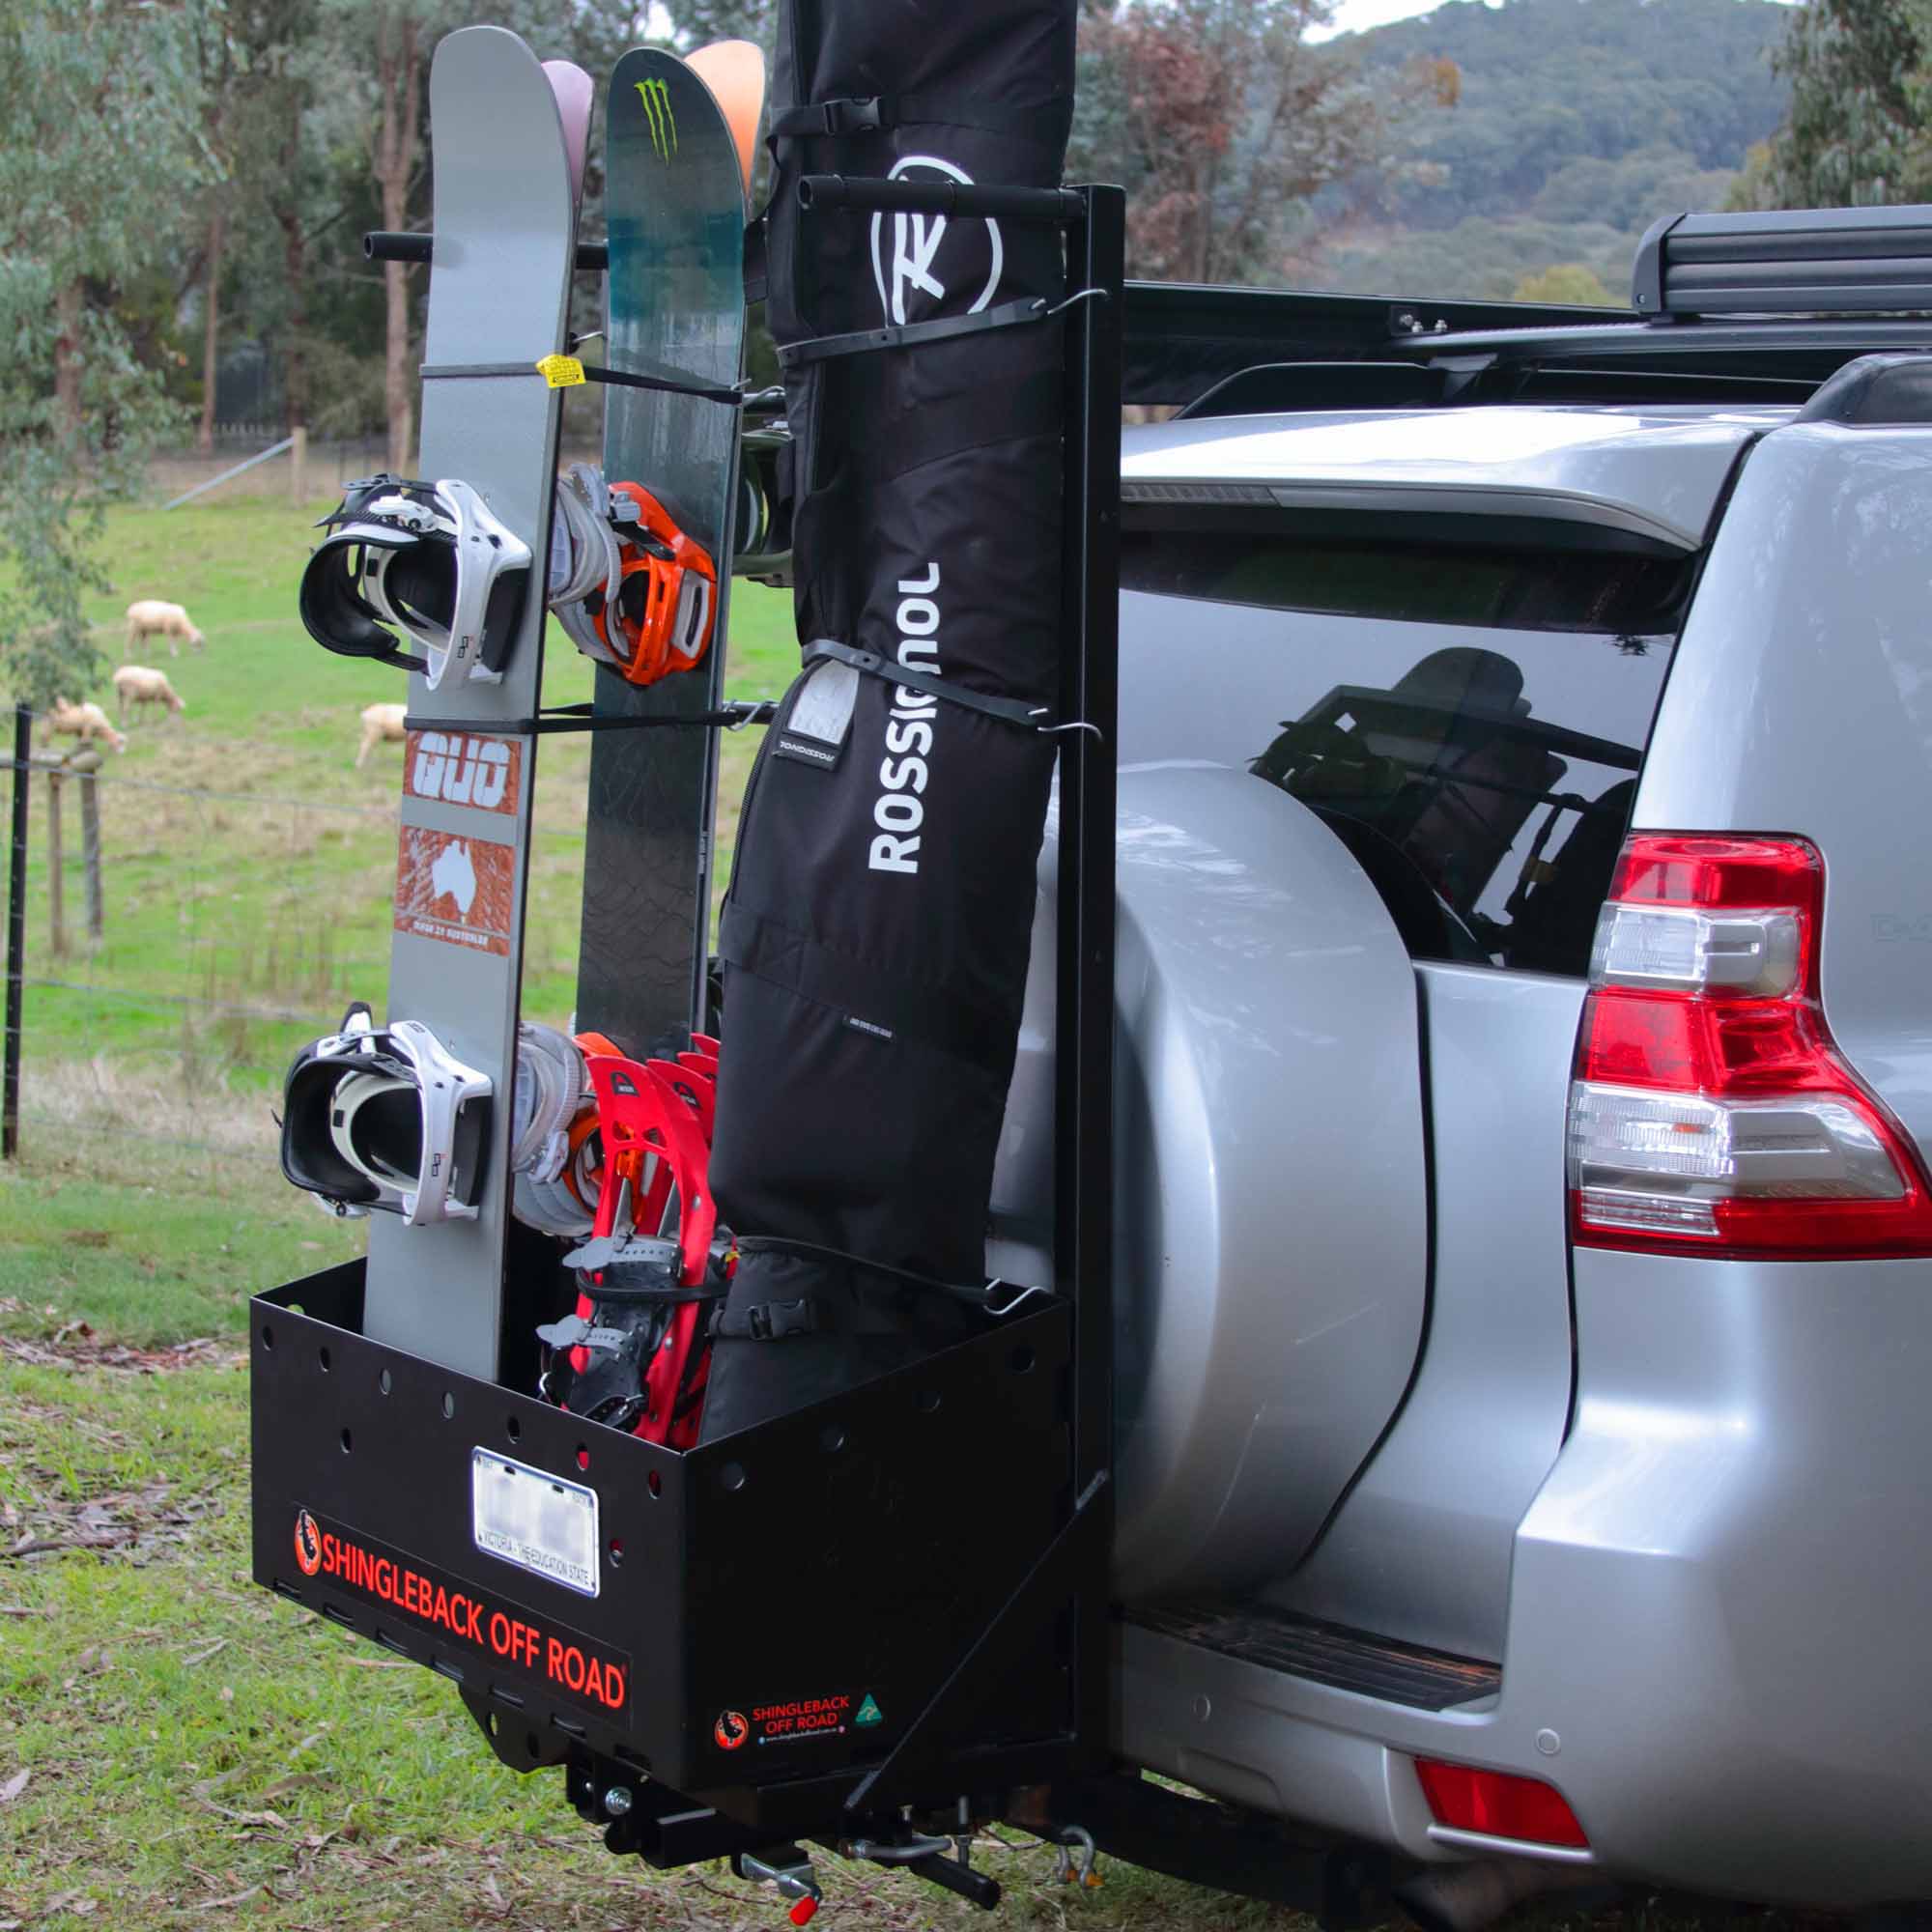 Shingleback Caddy with Snowboards and winter gear